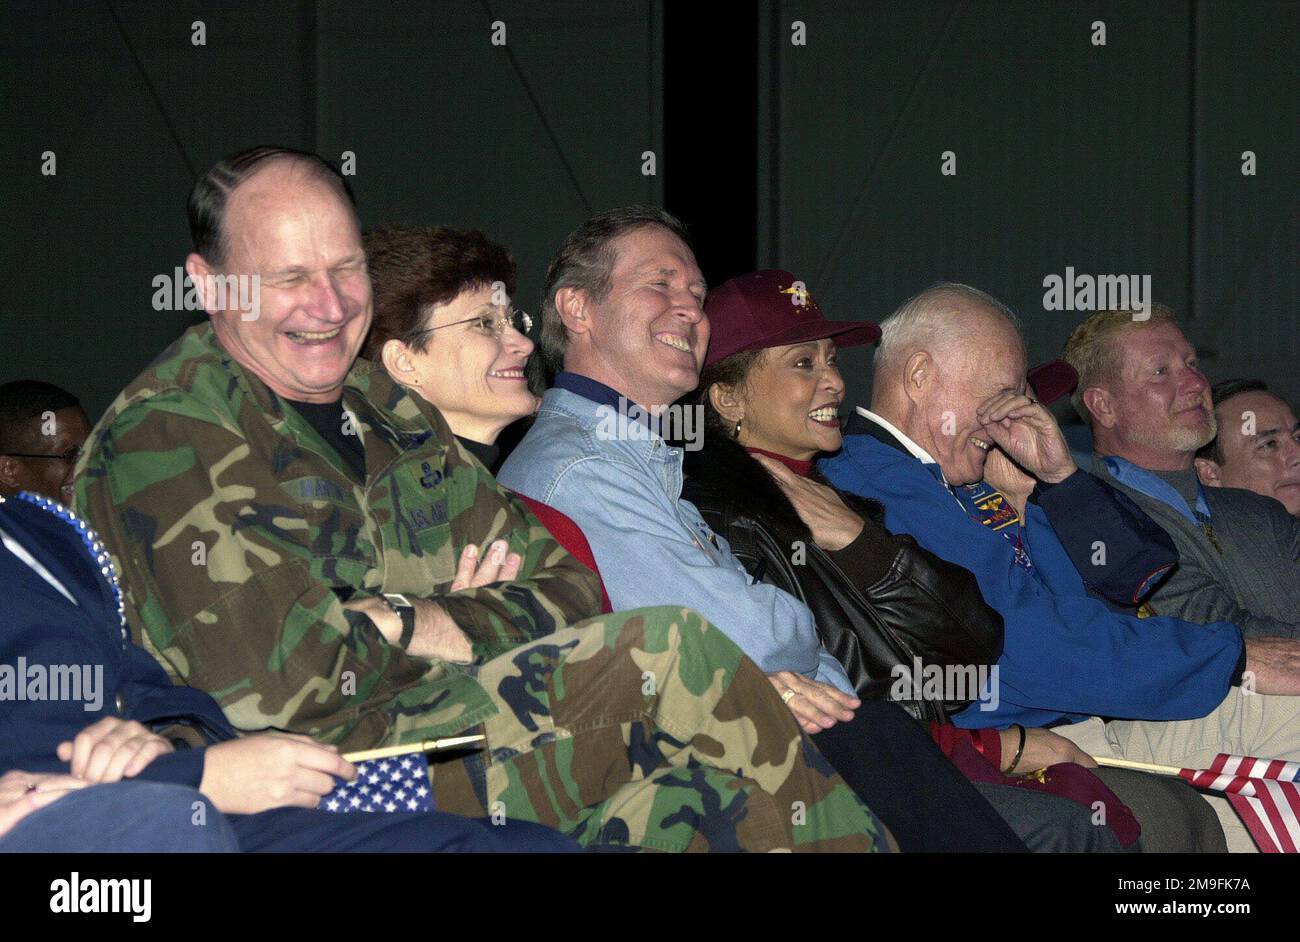 (from left to right) US Air Force General Gregory S. Martin, Commander, US Air Forces in Europe, Mrs. Wendy Martin, Secretary of Defense William S. Cohen, Mrs Janet Langhart Cohen, Senator John Glenn, Mrs Anne Glenn and Medal of Honor Recipient Mr. Sammy Davis enjoy the Secretary of Defense's Holiday Show 2000 at Ramstein Air Base, Germany on December 17, 2000. Base: Ramstein Air Base State: Rheinland-Pfalz Country: Deutschland / Germany (DEU) Stock Photo